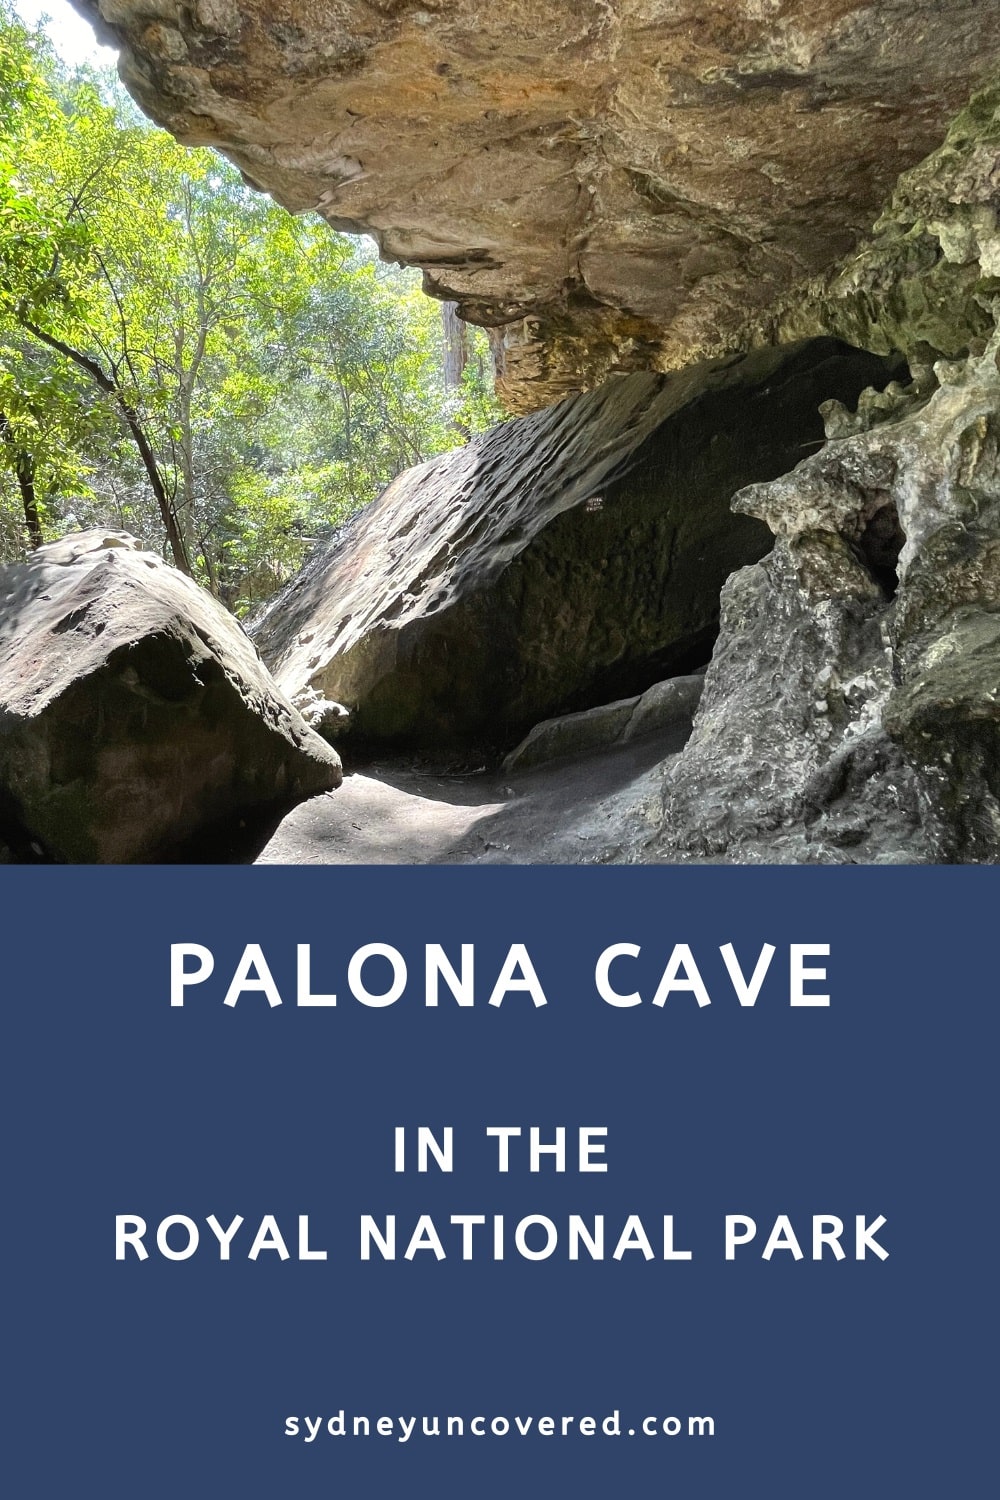 Palona Cave in Royal National Park